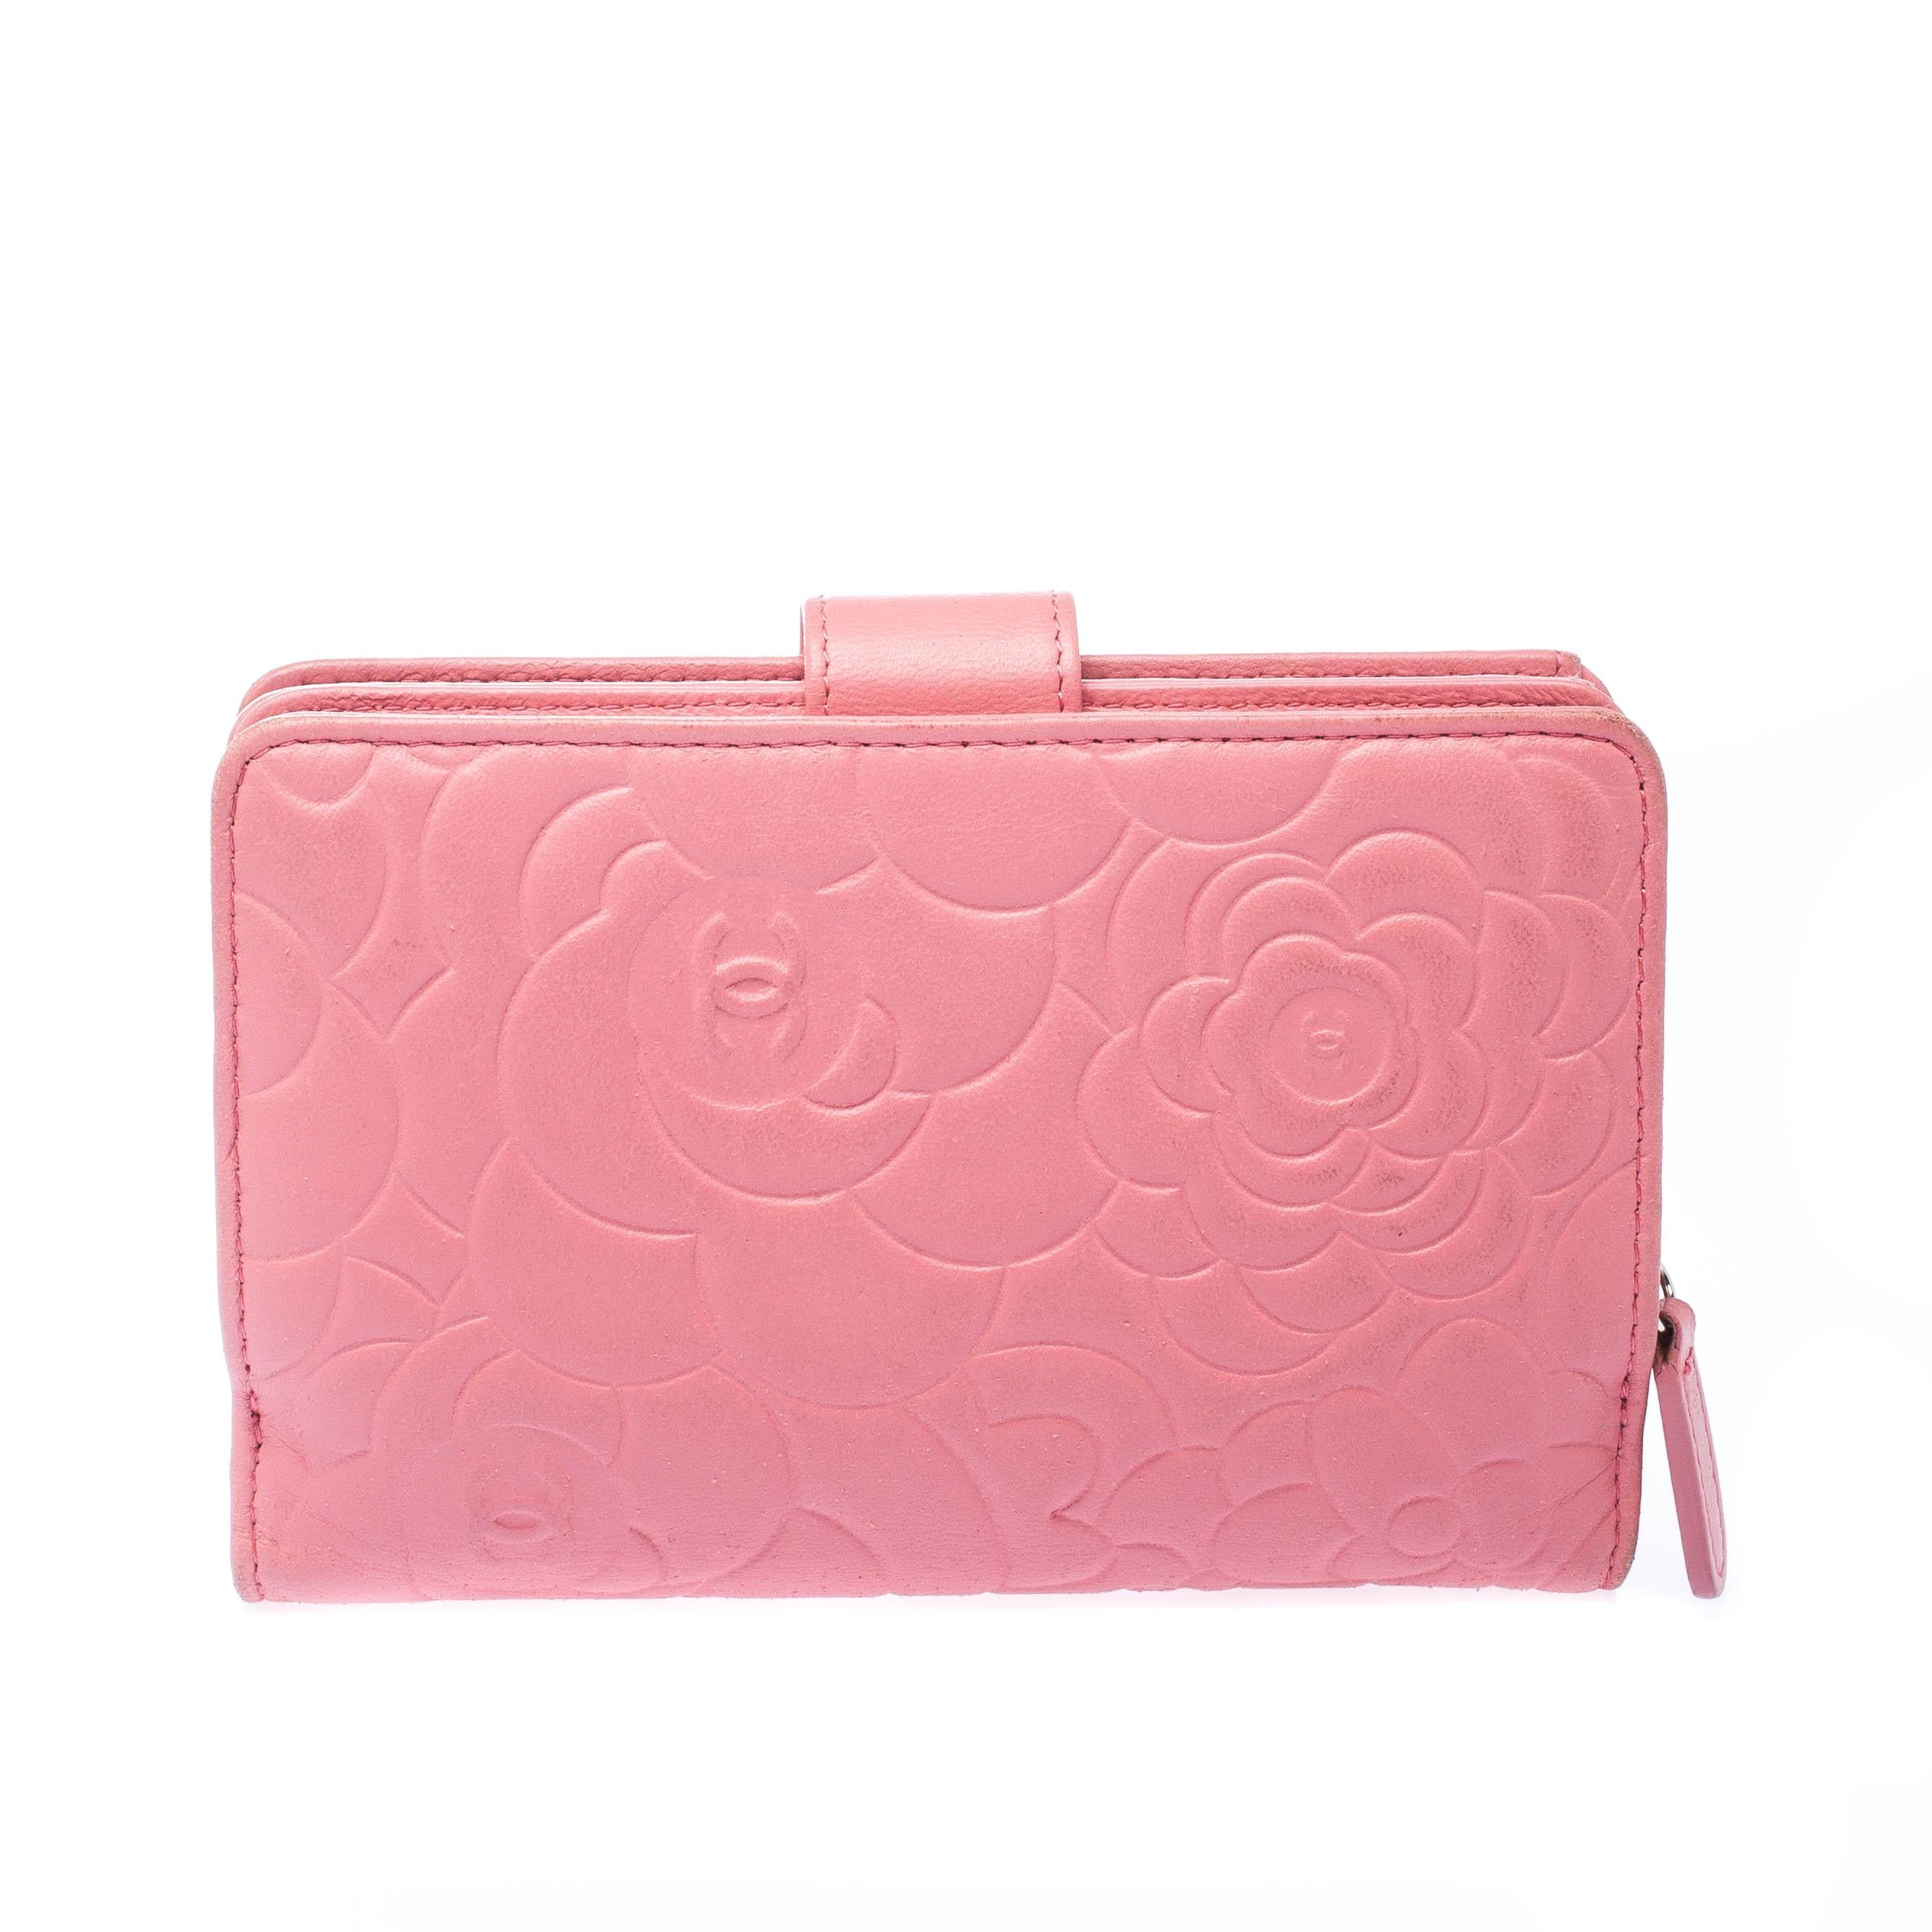 Embossed with the signature Camellia design, this Chanel wallet will keep you stylish and organised. Its bright pink color is matched with a smooth texture and a silver-tone metal CC charm on the front of the flap. The snap closure opens up to a